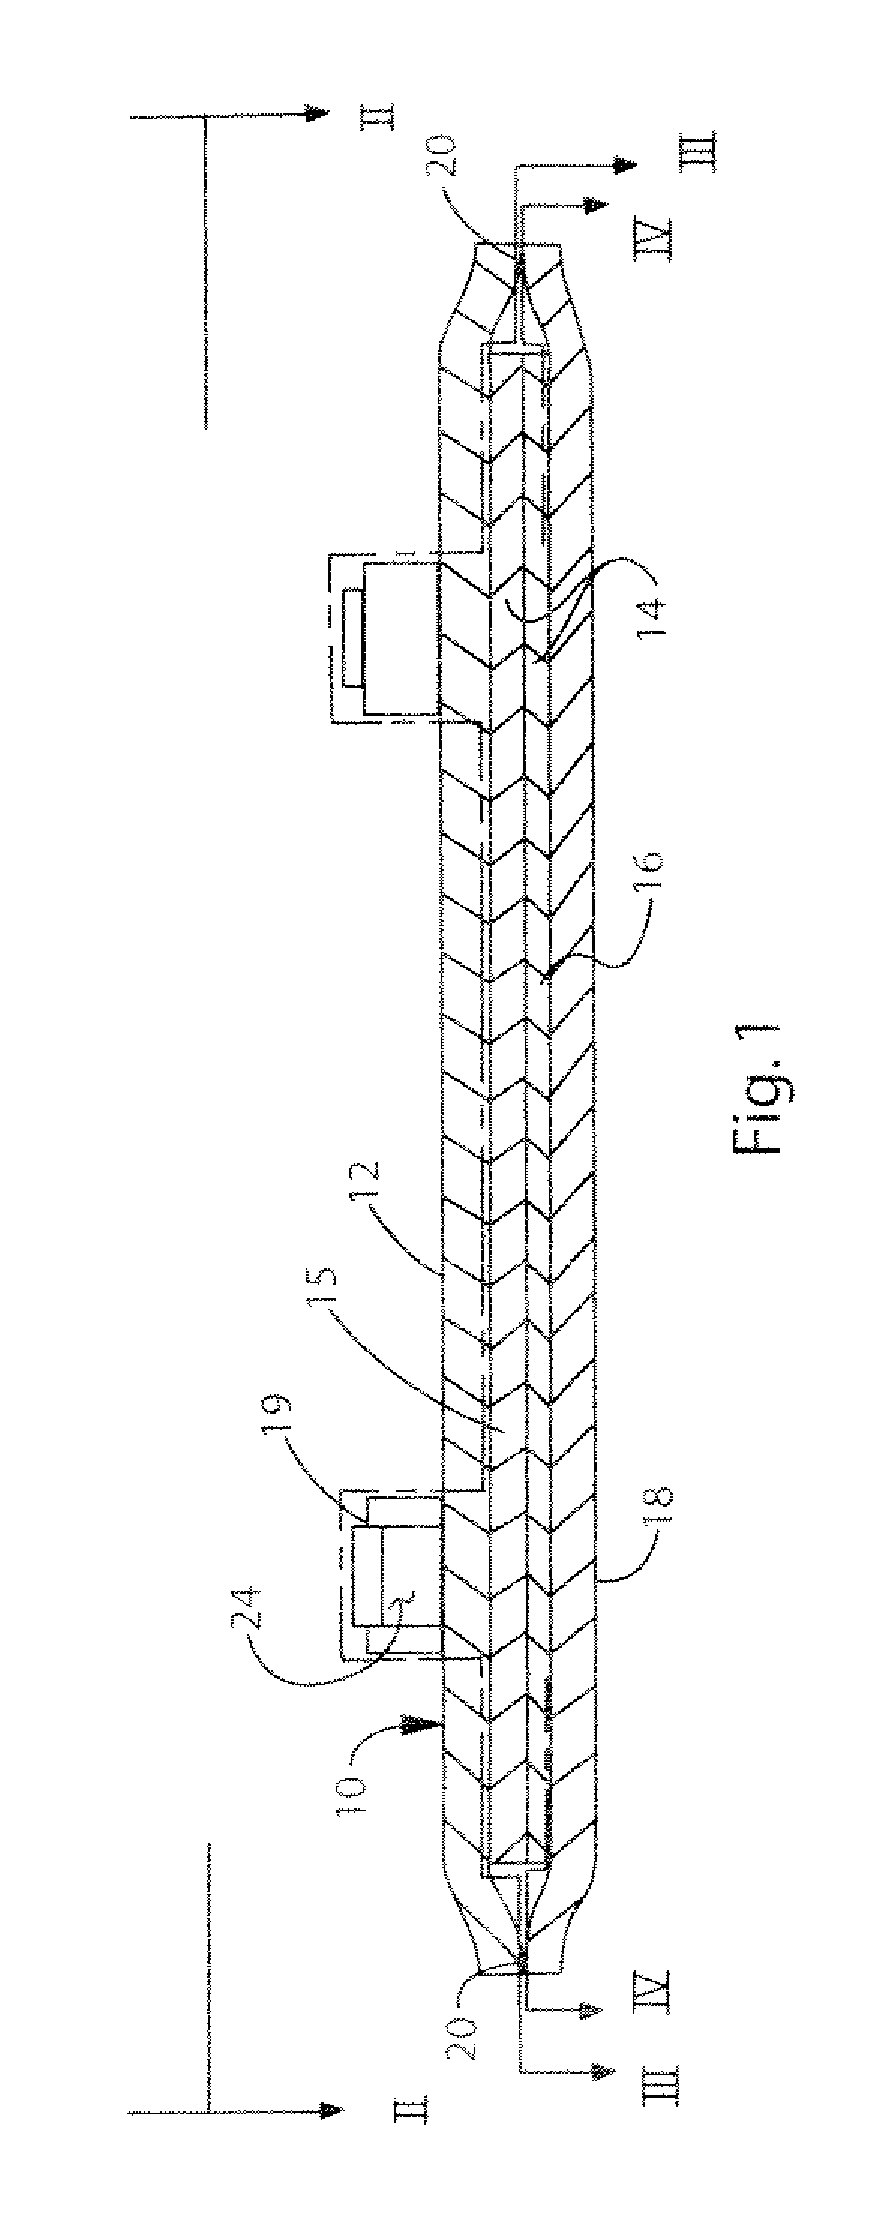 Child Resistant Blister Packaging and a Method of Removing The Contents Therefrom